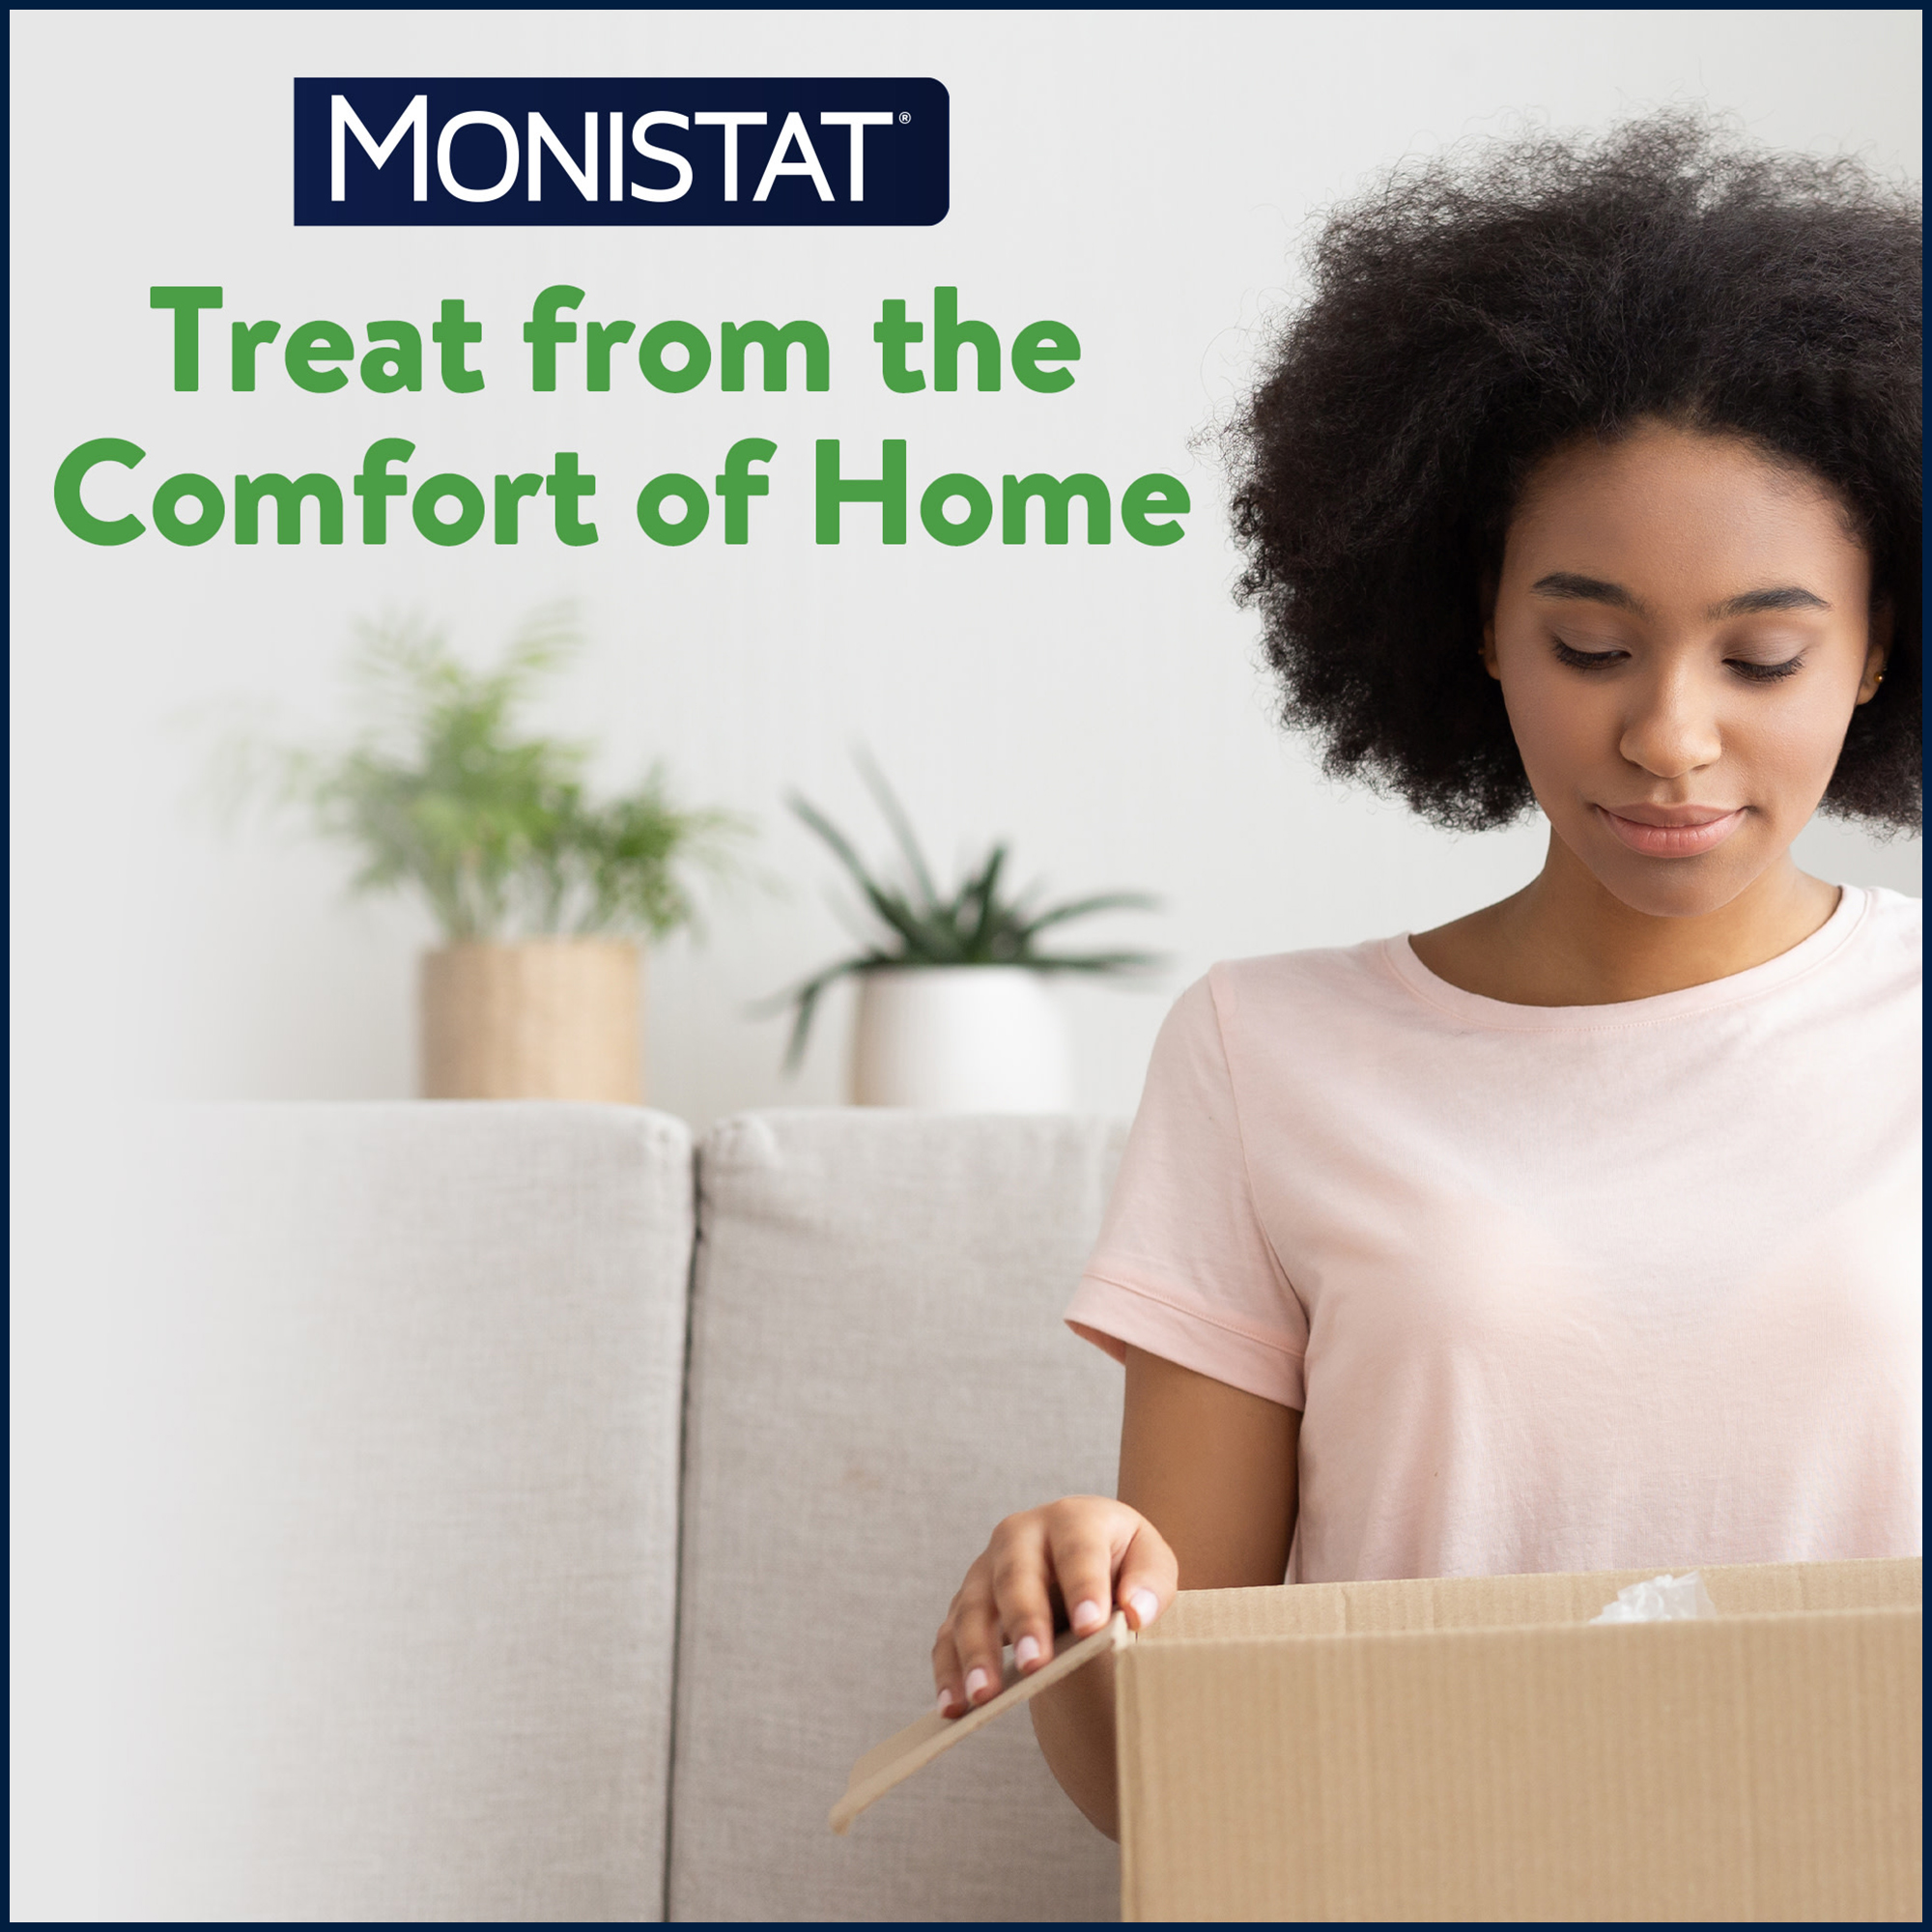 Monistat 3 Day Yeast Infection Treatment, 3 Miconazole Pre-Filled Cream Tubes & External Itch Cream - image 8 of 17